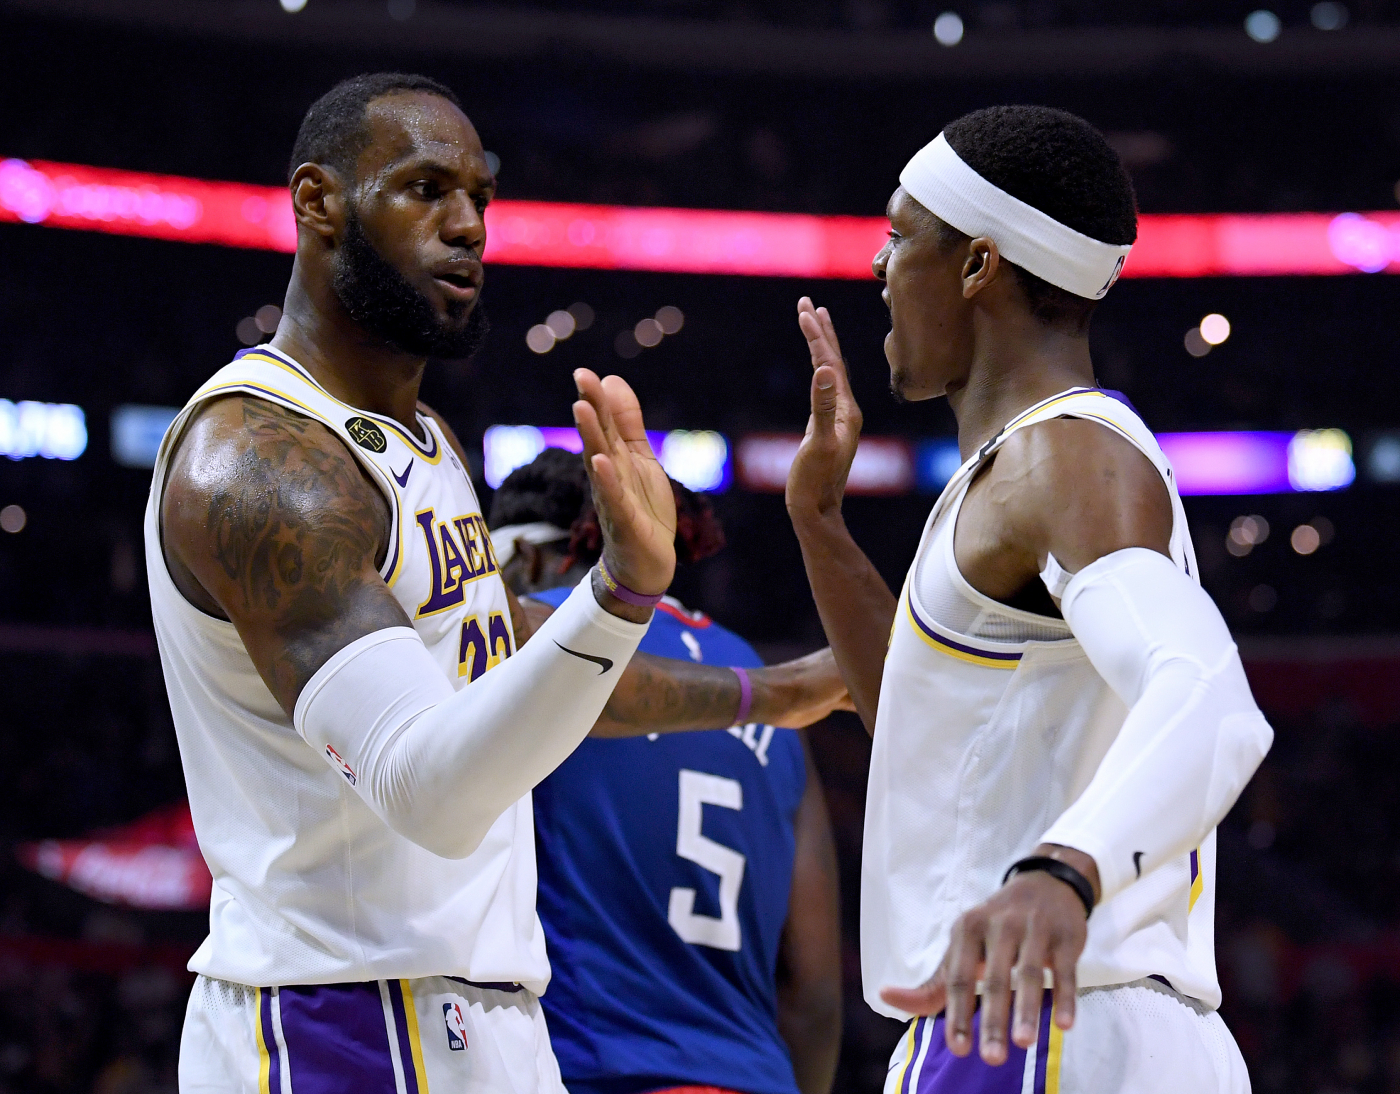 Rajon Rondo wants you to pay attention to LeBron James, not the needless  distraction he created